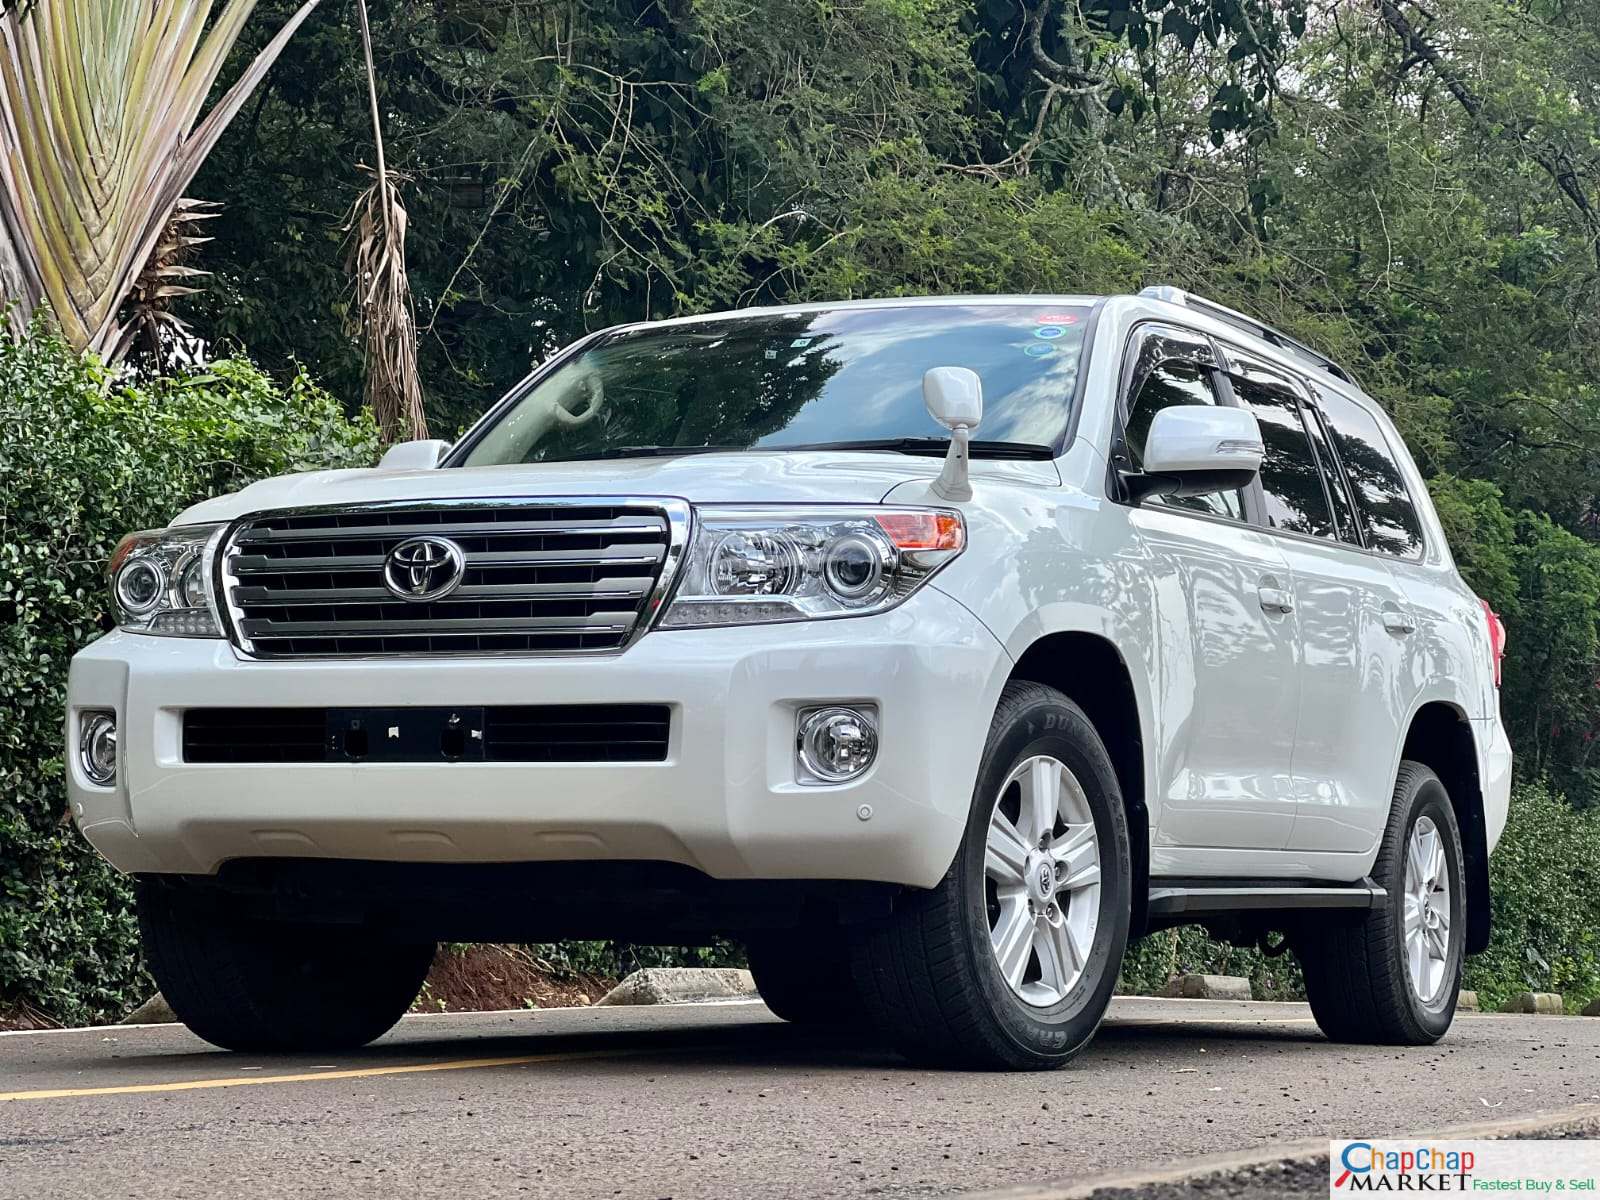 Toyota Land cruiser V8 AXG CHEAPEST HIRE PURCHASE EXCLUSIVE